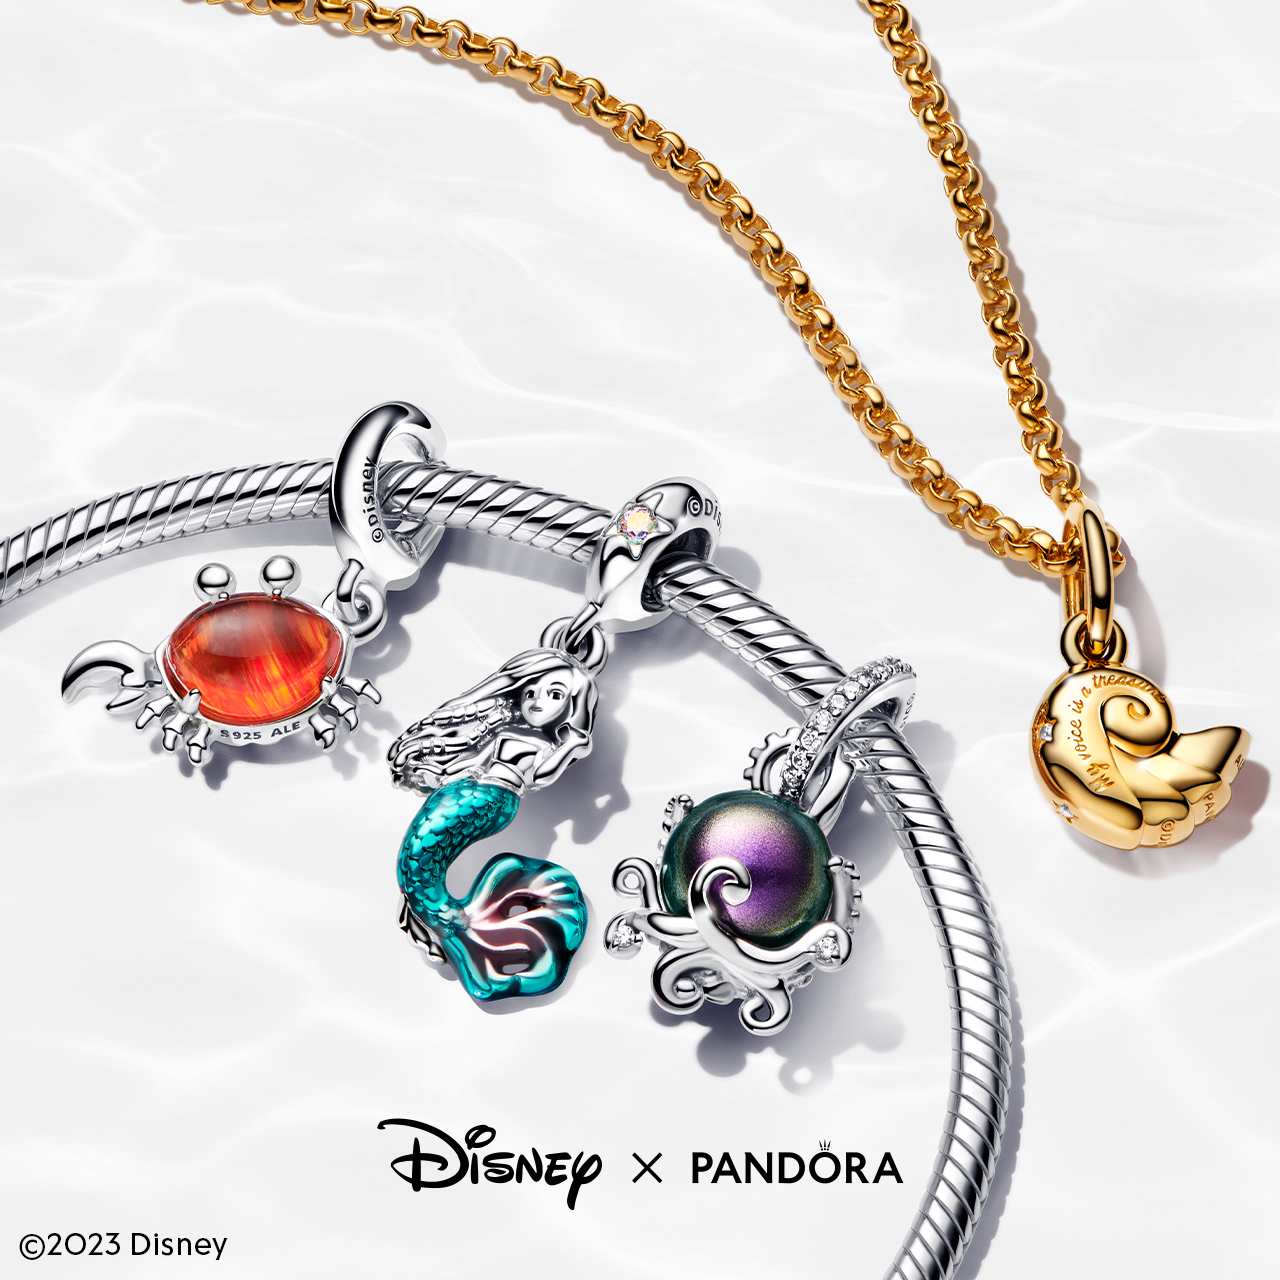 Pandora Campaign 99 Carry a piece of your favorite story with our latest collection inspired by the fearless mermaid Ariel from Disneys The Little Mermaid . EN 1280x1280 1